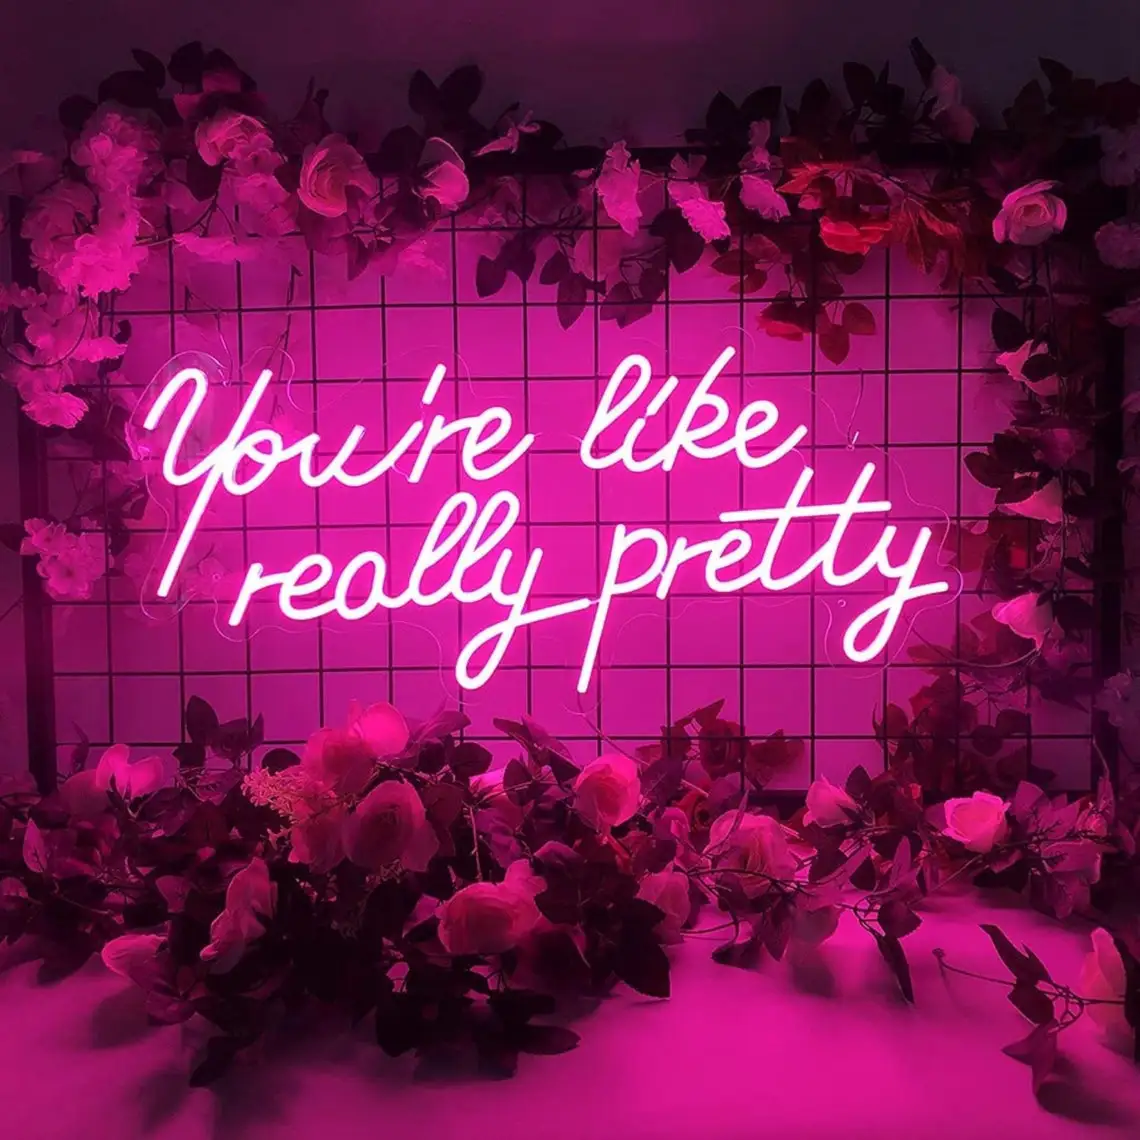 You're Like Really Pretty Neon Sign Led Light, Custom Neon Sign, Wedding Neon Sign, Hand Crafted Wall Hangings, Wall decor, Birt